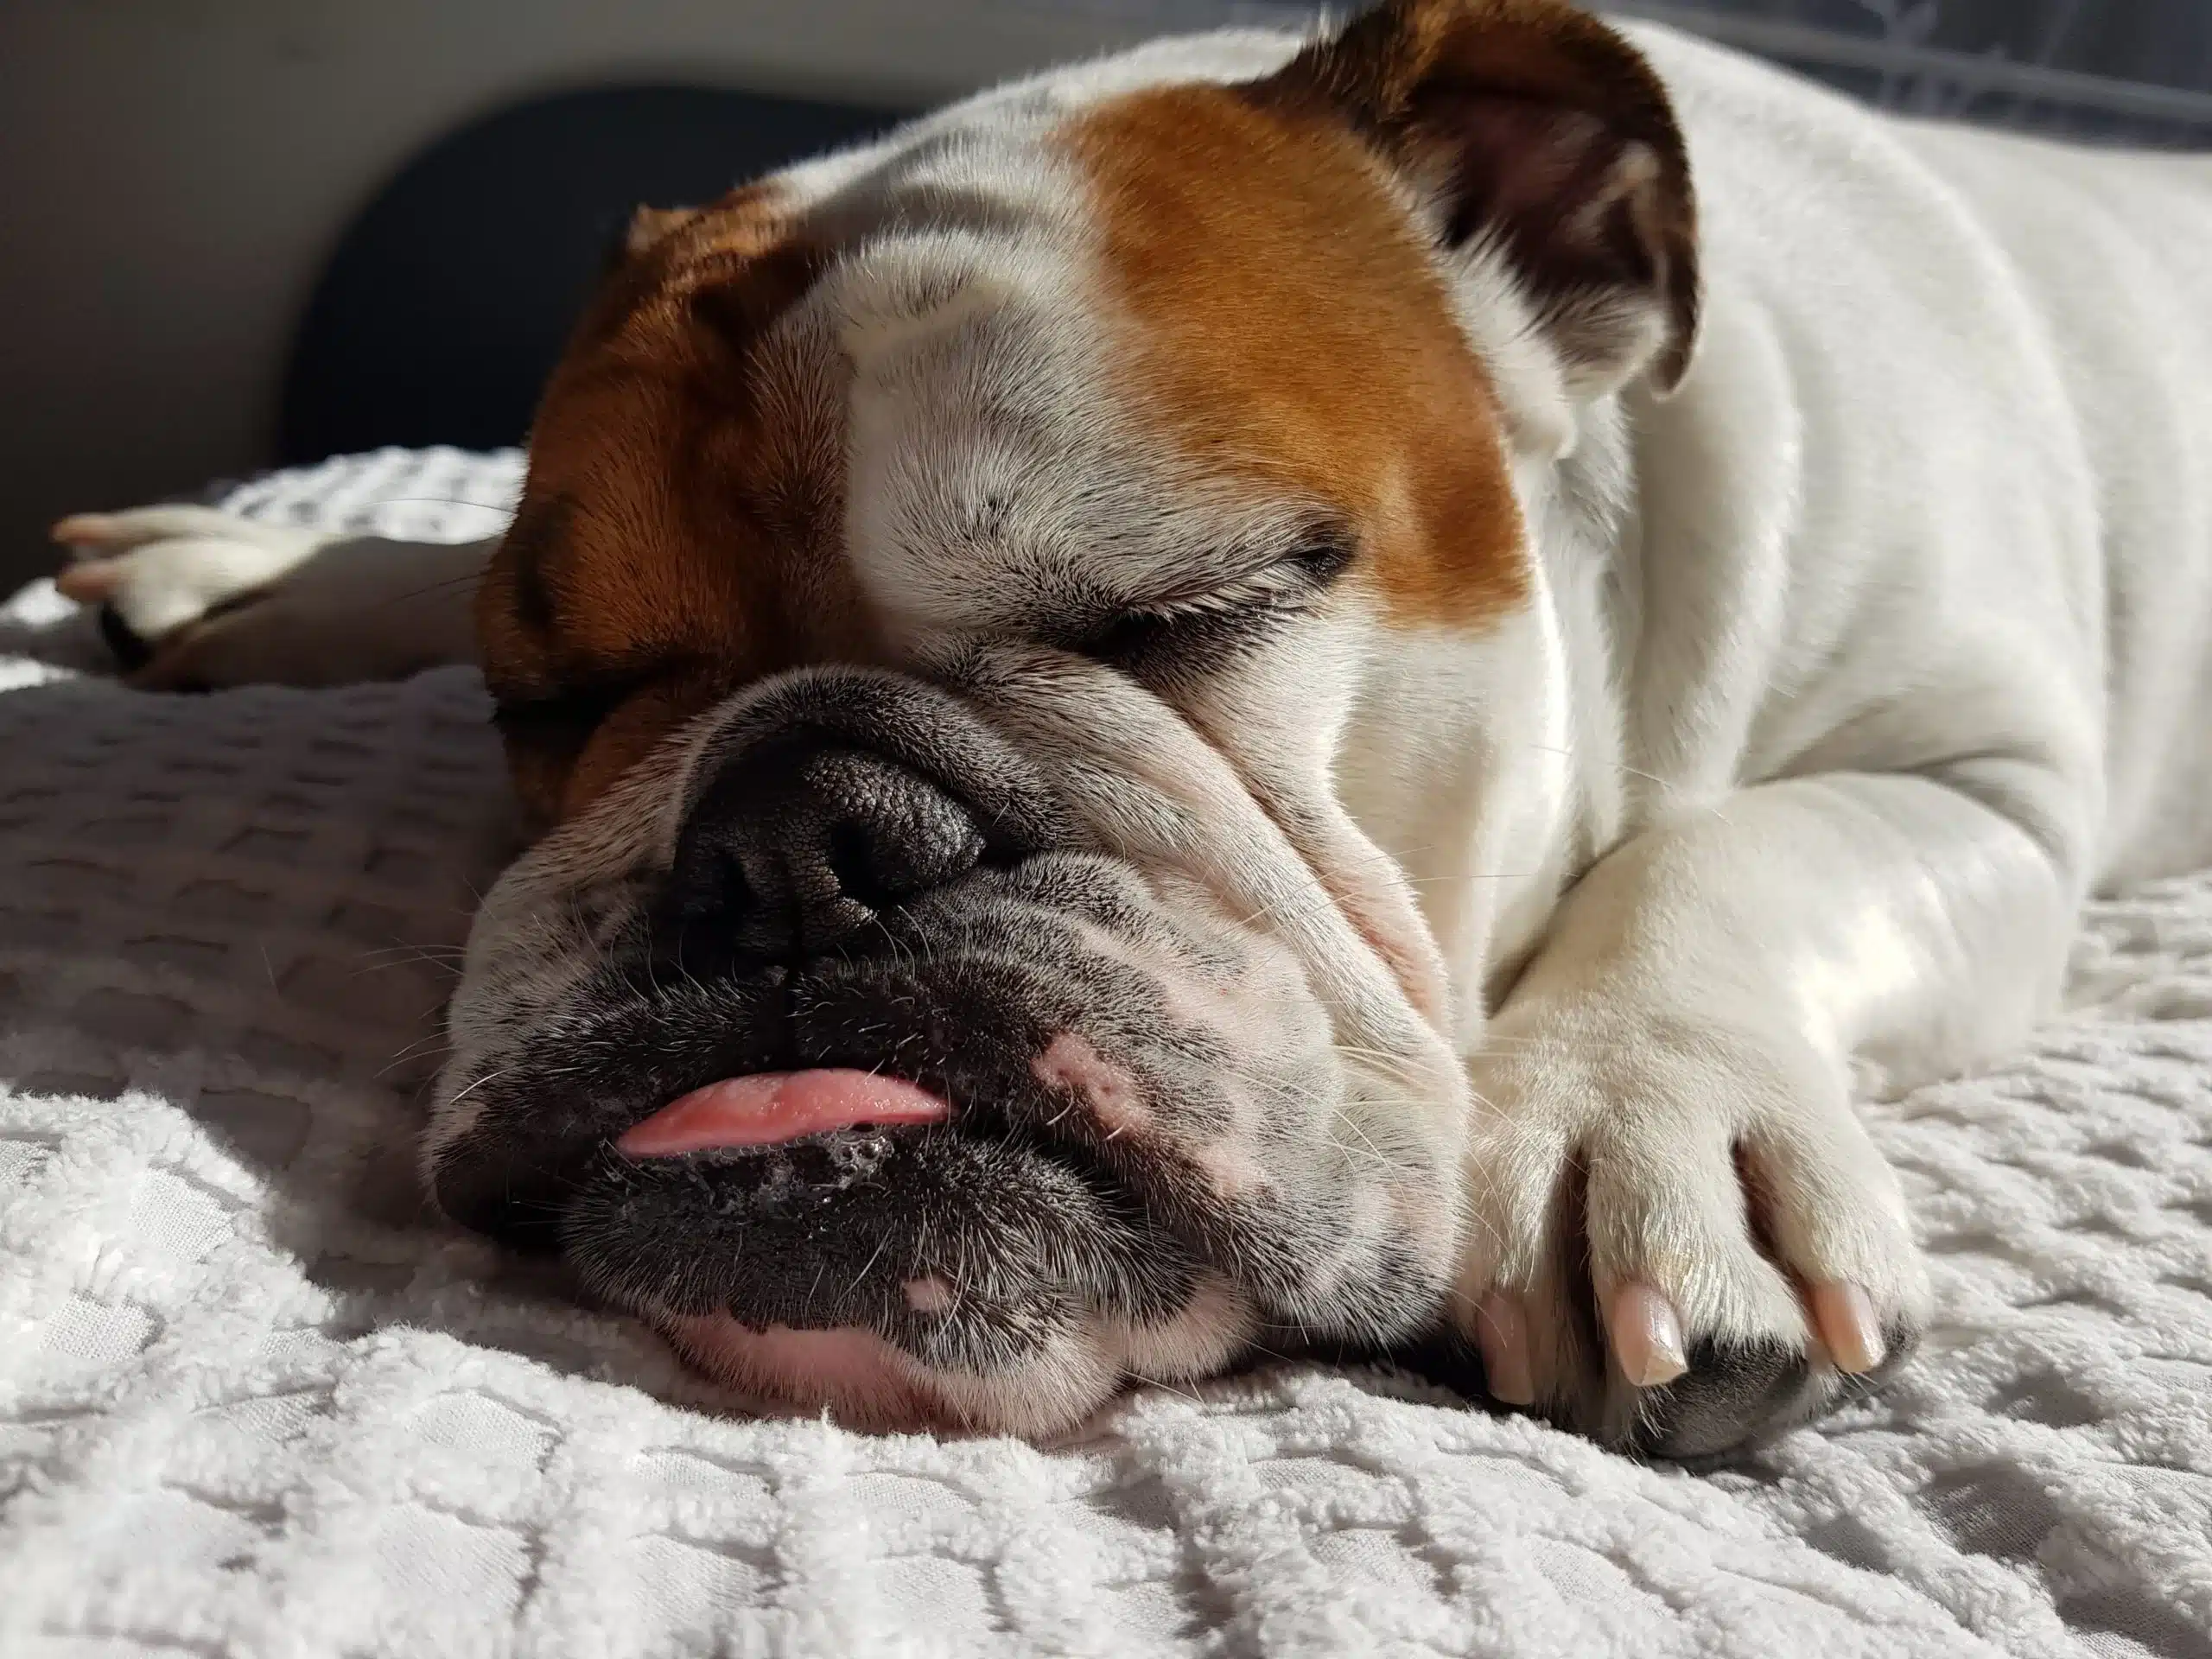 A bulldog sleeping on a bed with his mouth open, wondering what temperature is OK for dogs to sleep outside.